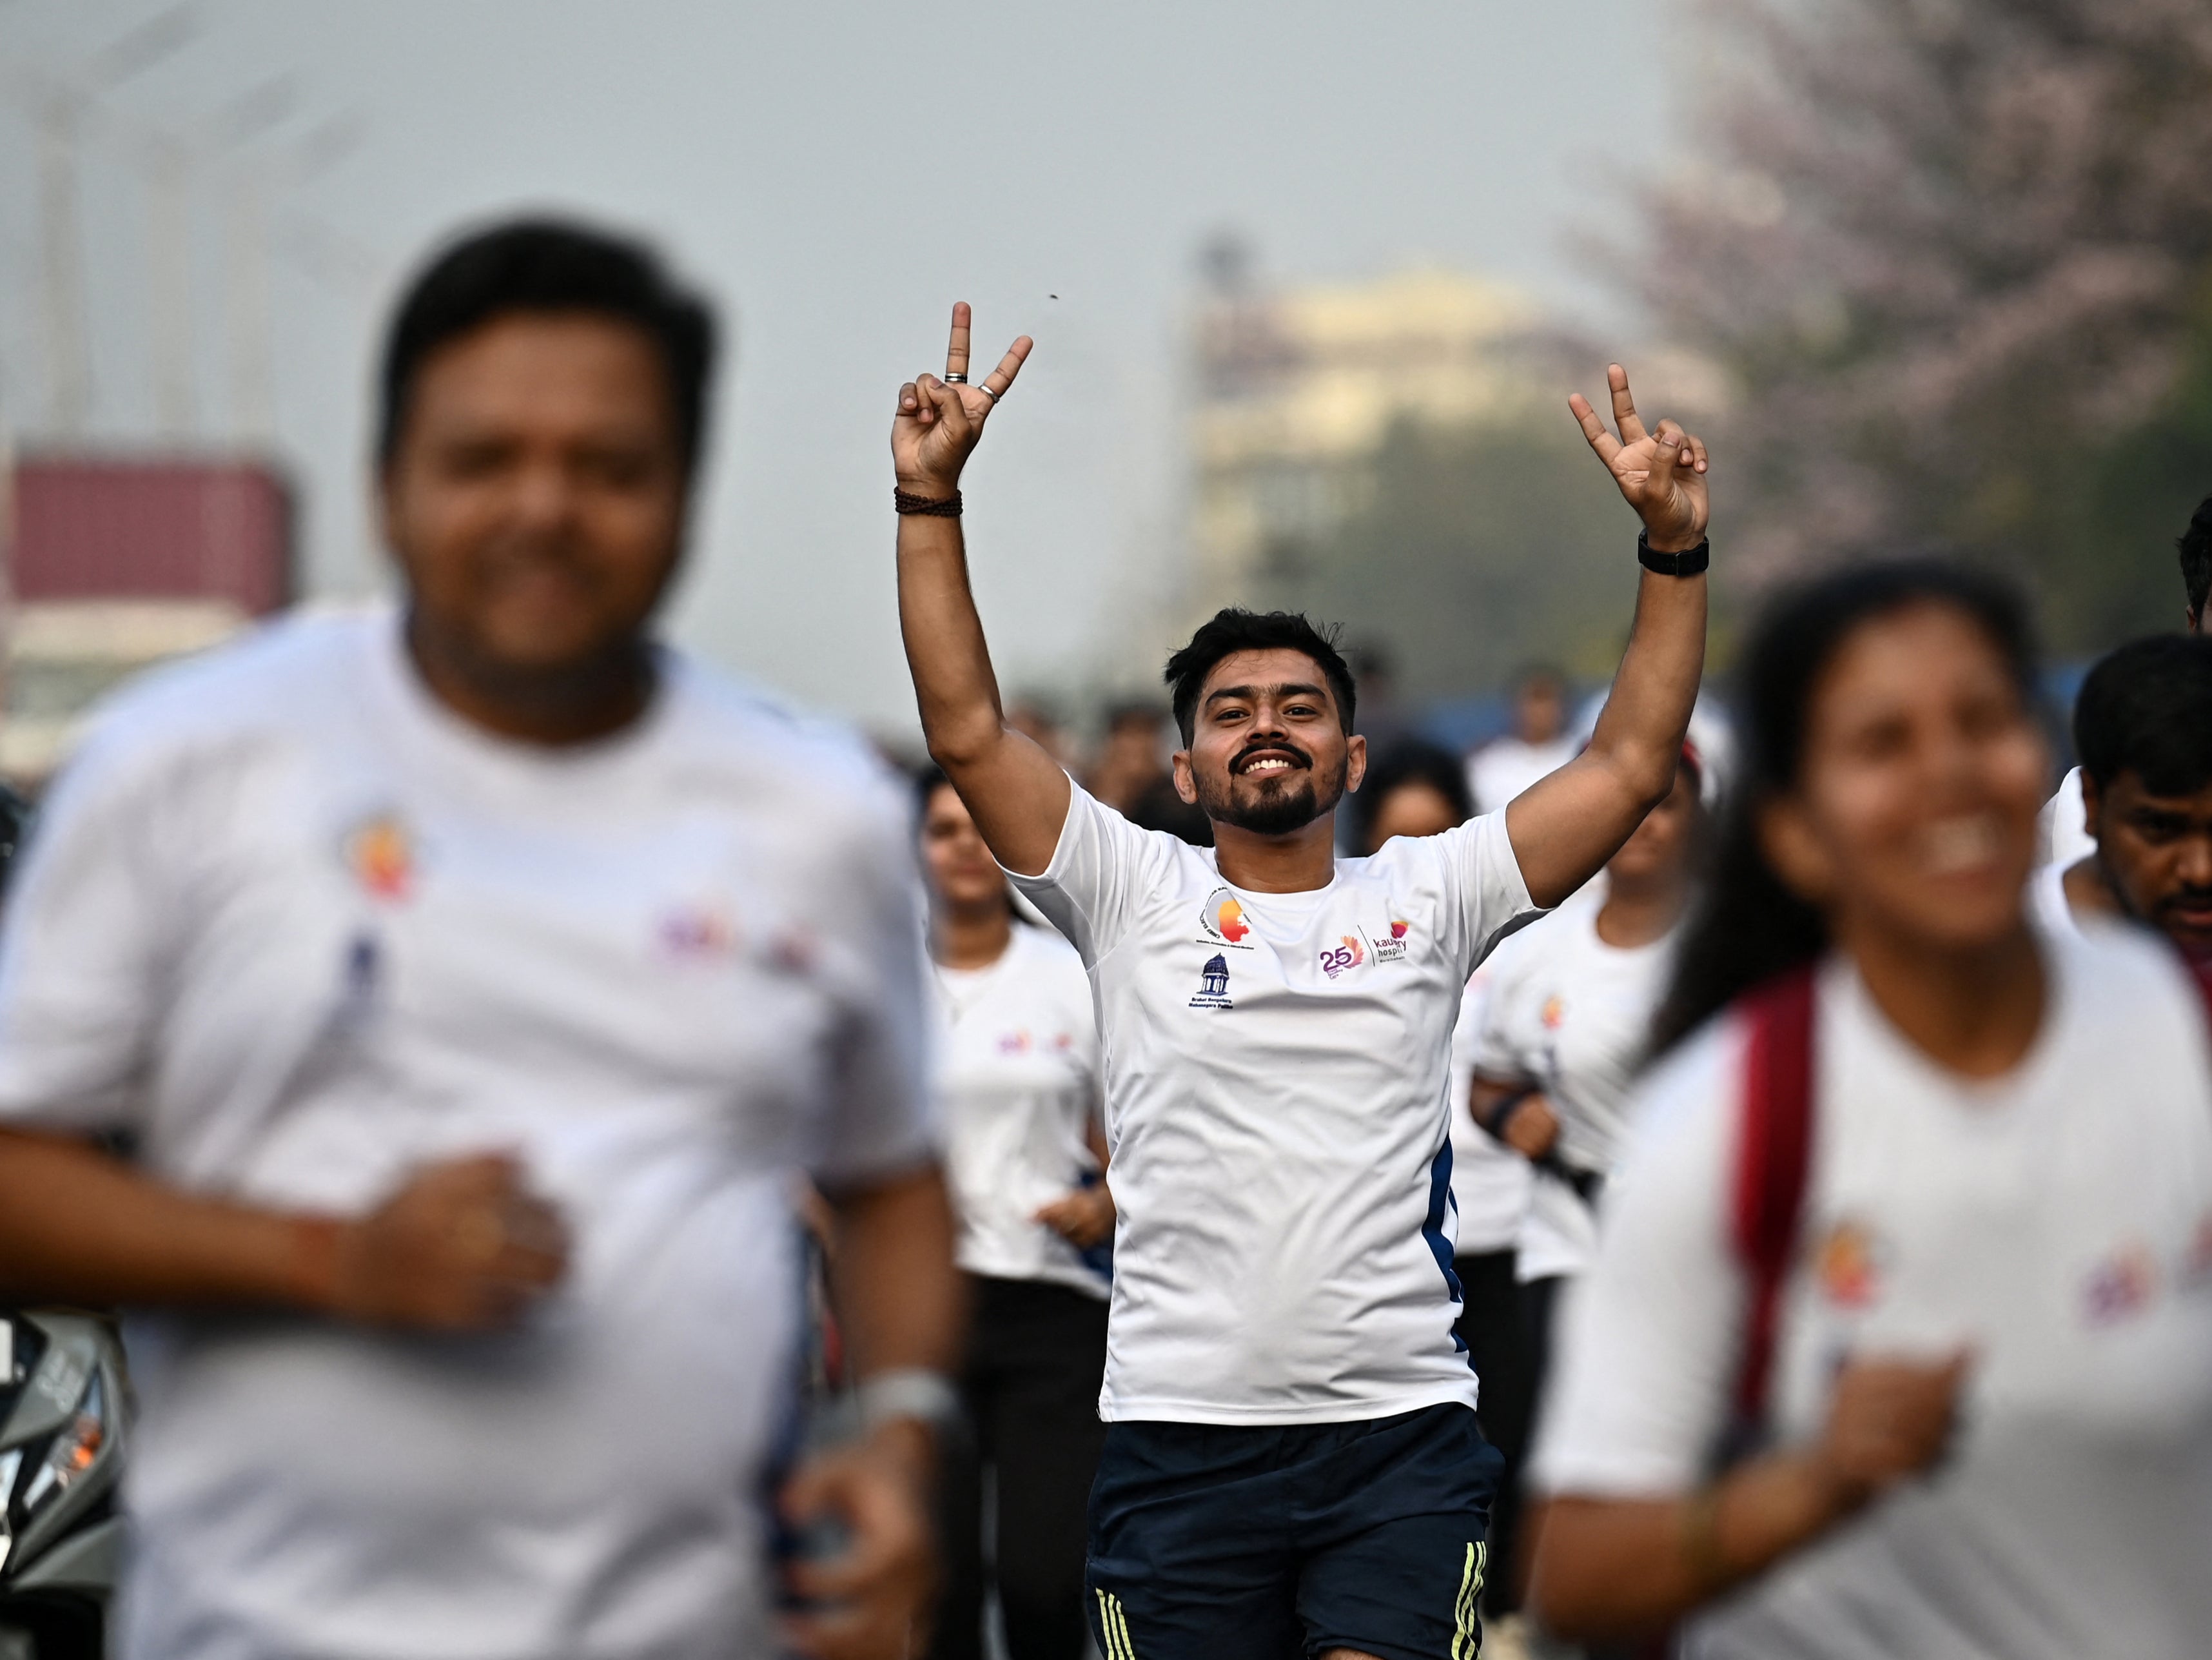 Participants walk down a road during the Vote-A-Thon, an awareness campaign organised by the Karnataka’s Chief Electoral Office to encourage 100 per cent voting turnout for the upcoming 2024 general elections, in Bengaluru on 17 March 2024